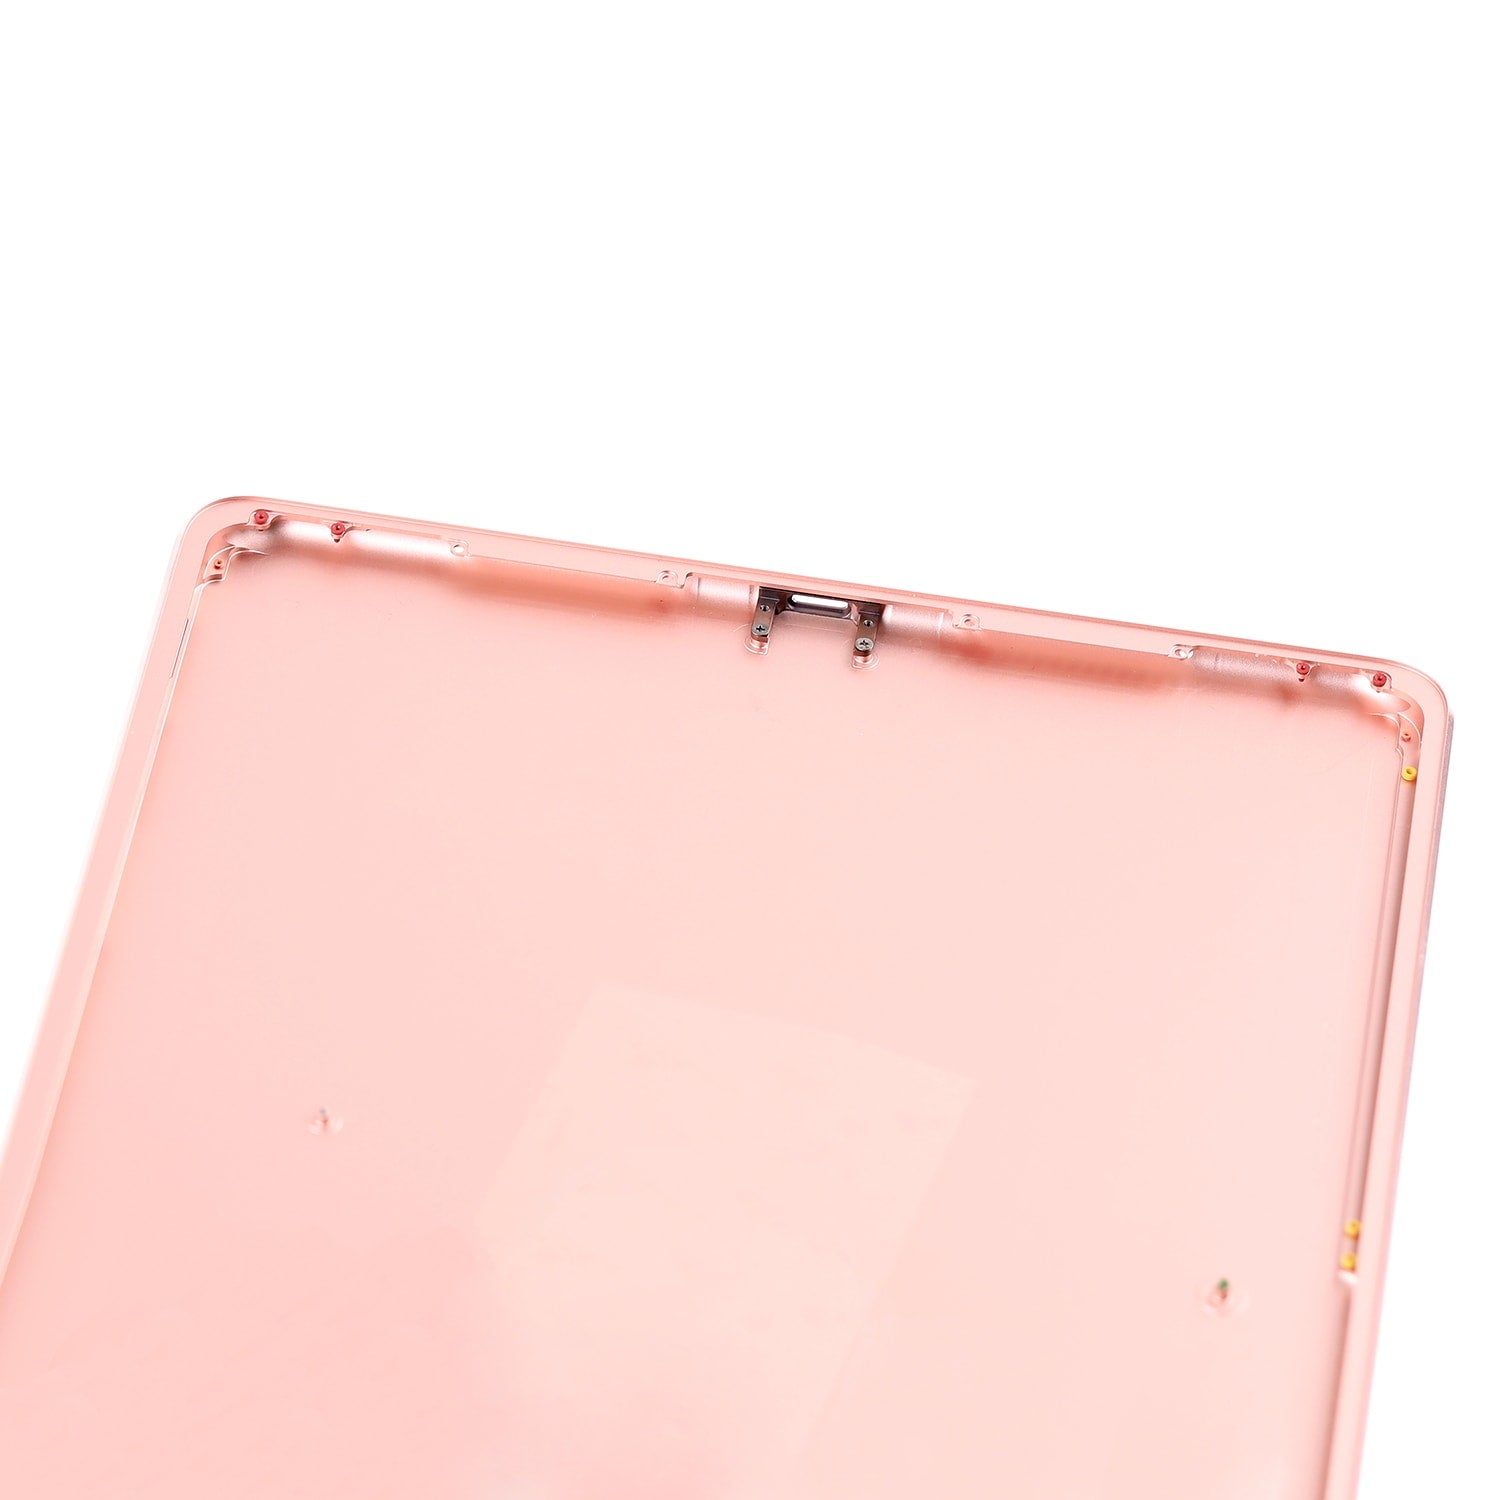 BACK COVER WIFI VERSION FOR IPAD PRO 9.7"- ROSE